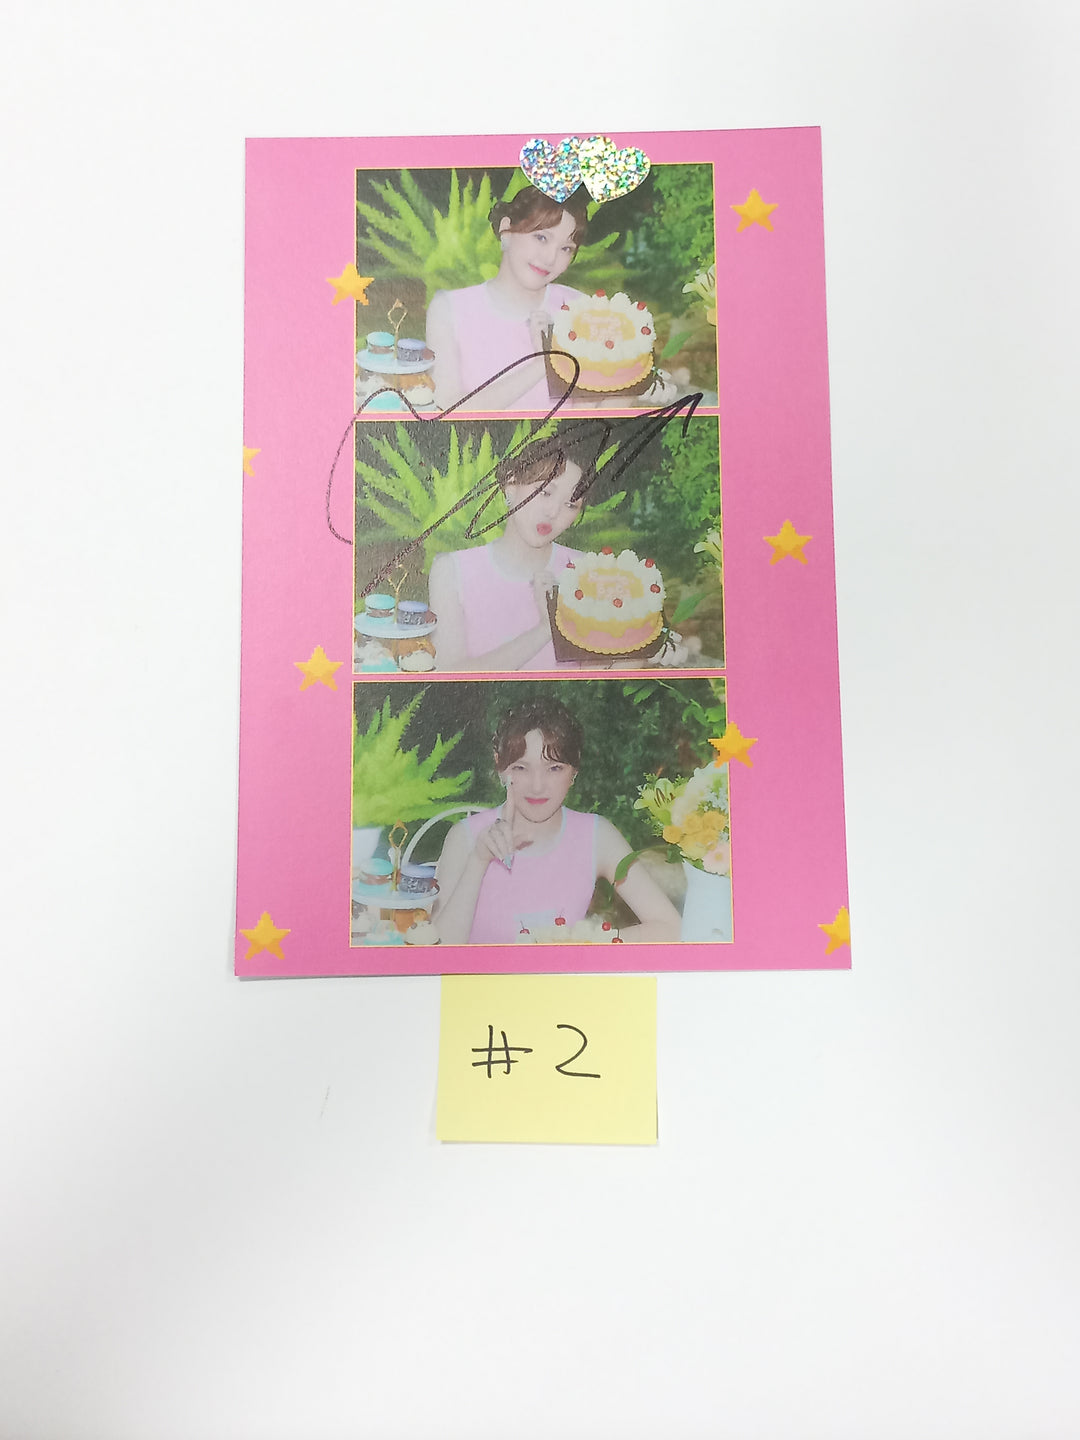 YERIN 'Ready, Set, LOVE' - A Cut Page From Fansign Event Album [23.10.11]